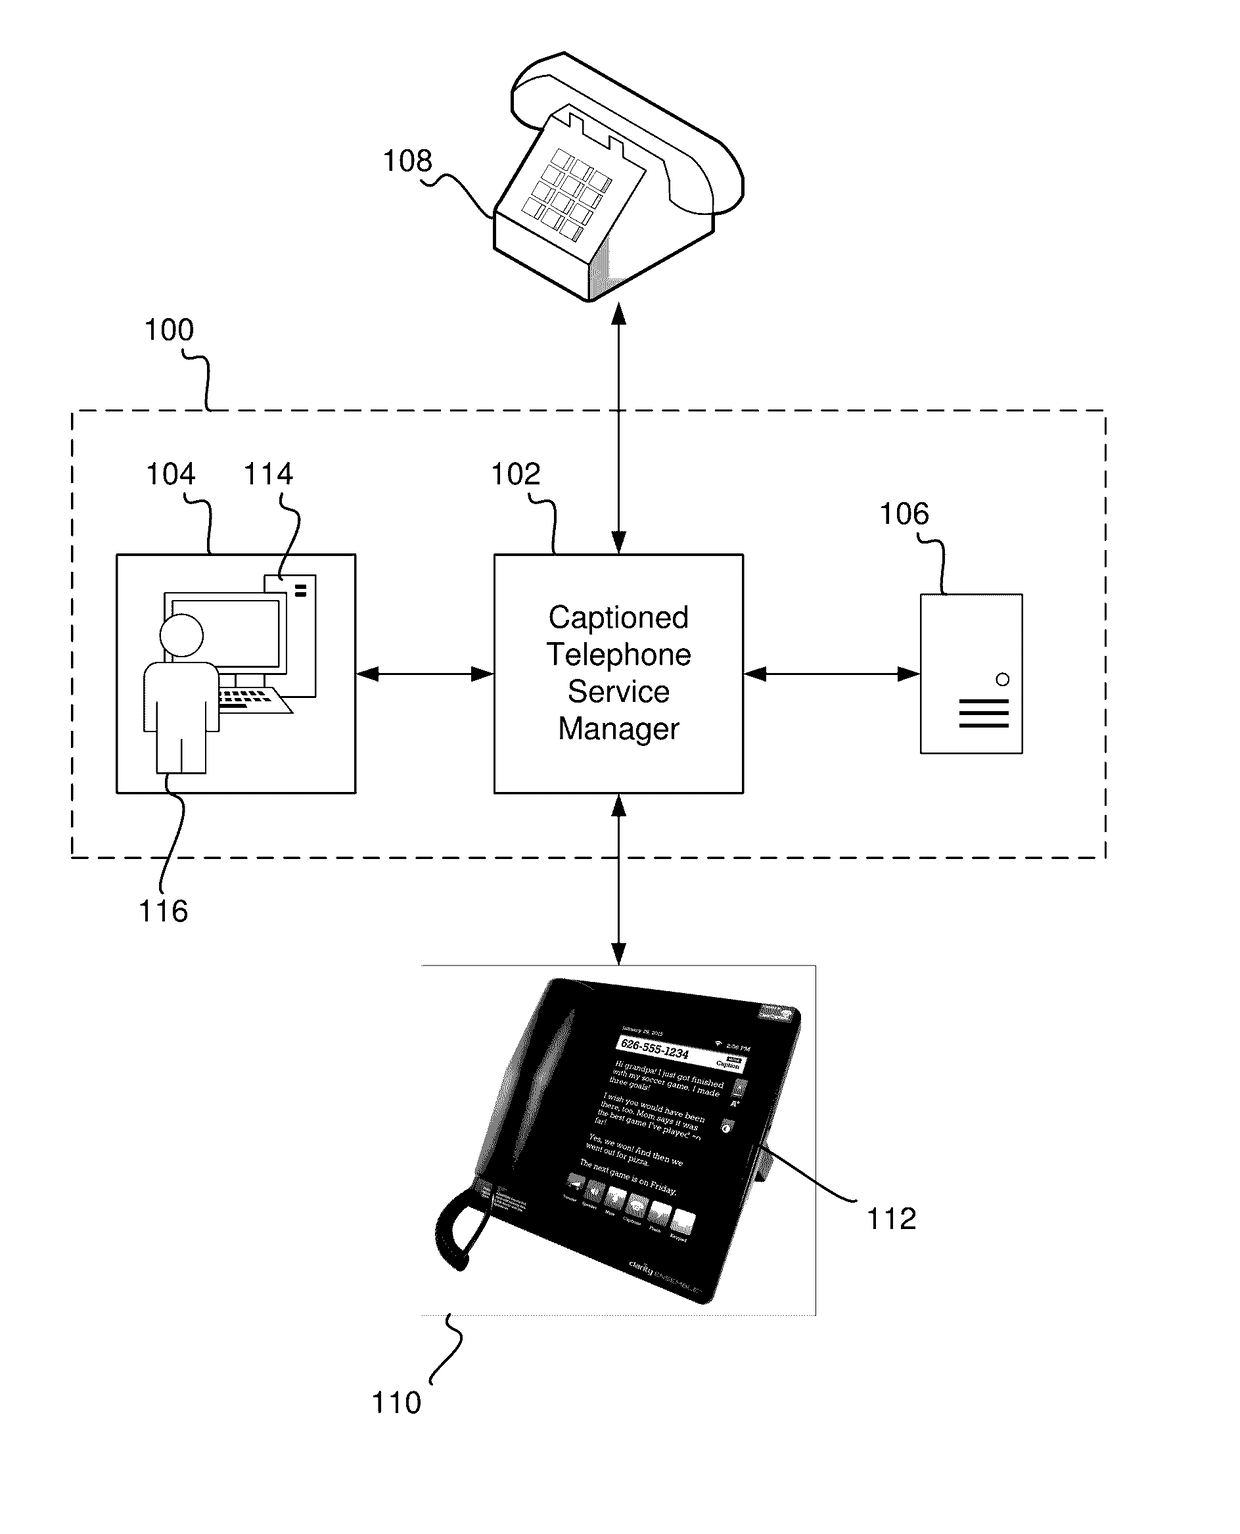 Method and system for providing captioned telephone service with automated speech recognition